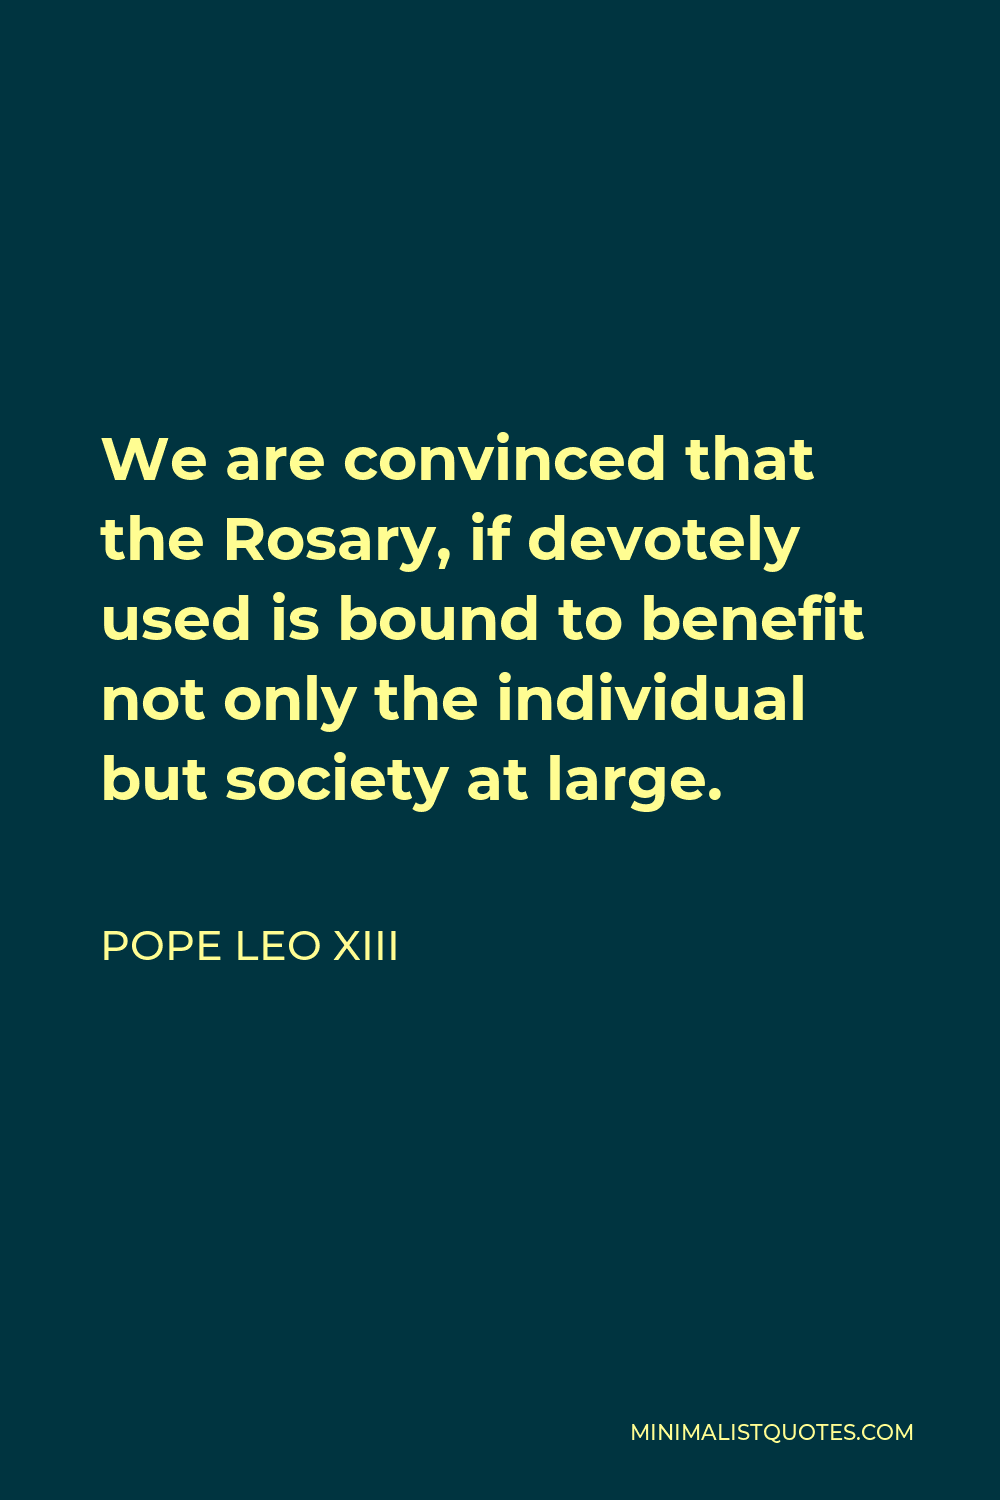 Pope Leo XIII Quote - We are convinced that the Rosary, if devotely used is bound to benefit not only the individual but society at large.